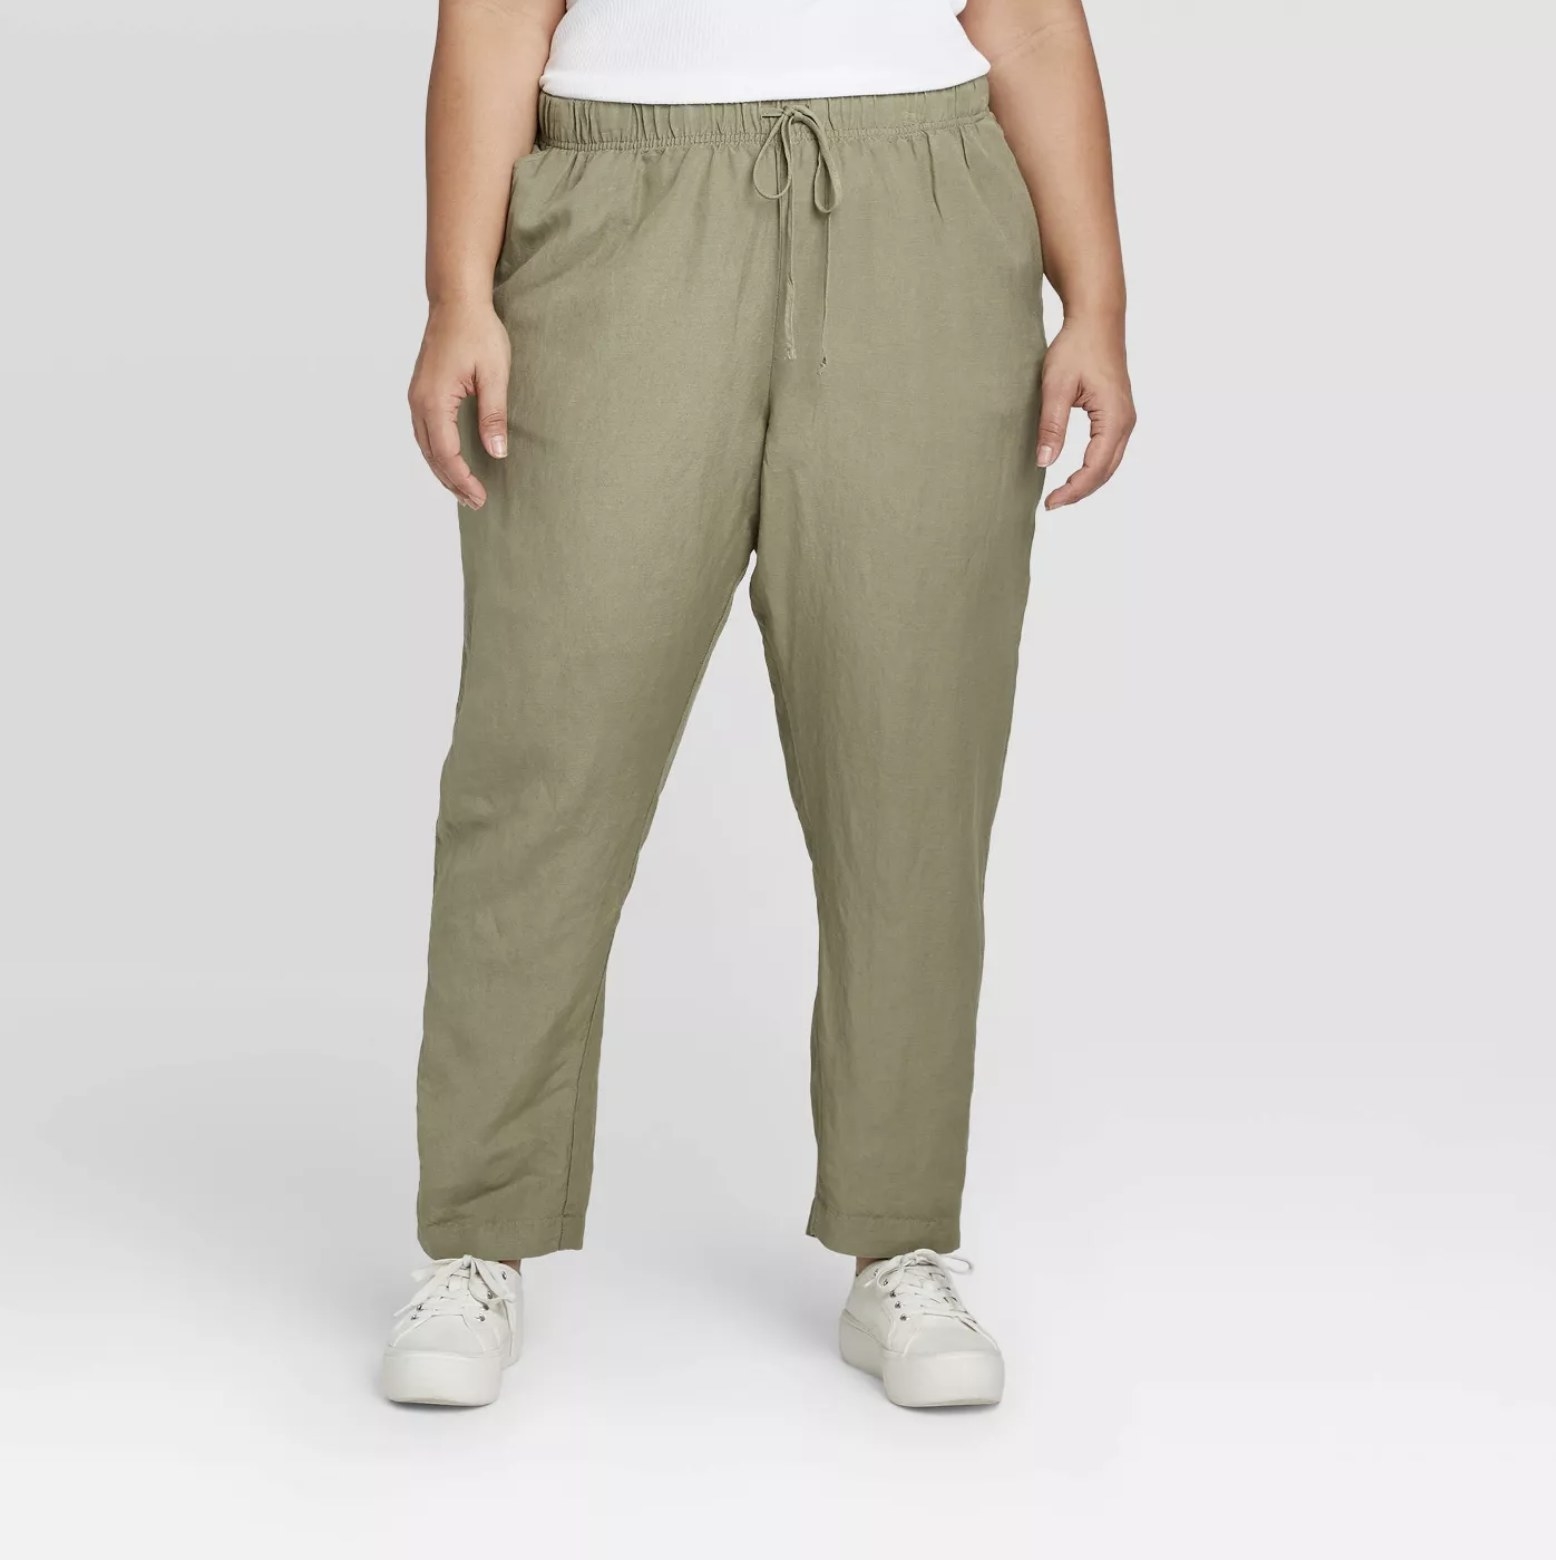 Model is wearing olive green linen skinny ankle pants with a drawstring waist and white tennis shoes